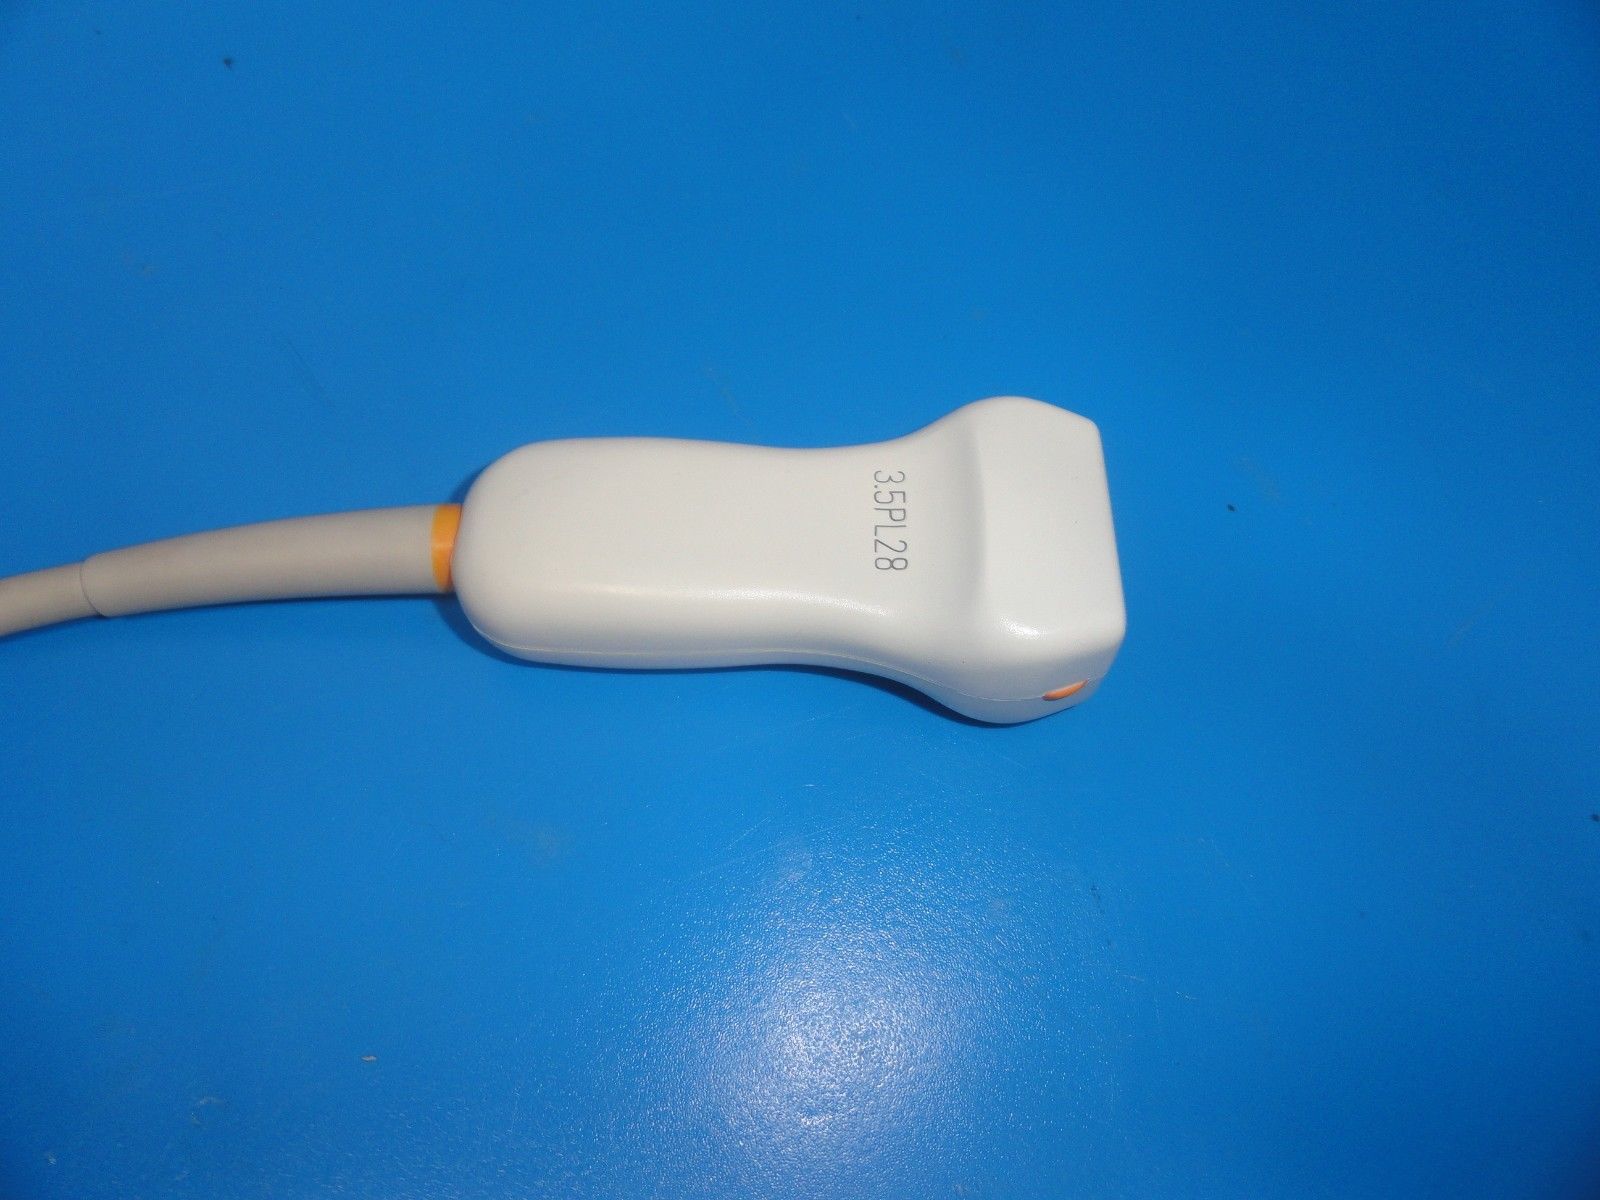 SIEMENS 3.5PL28 3.5 MHz Cardiac Sector phased Array Ultrasound Transducer (6082) DIAGNOSTIC ULTRASOUND MACHINES FOR SALE